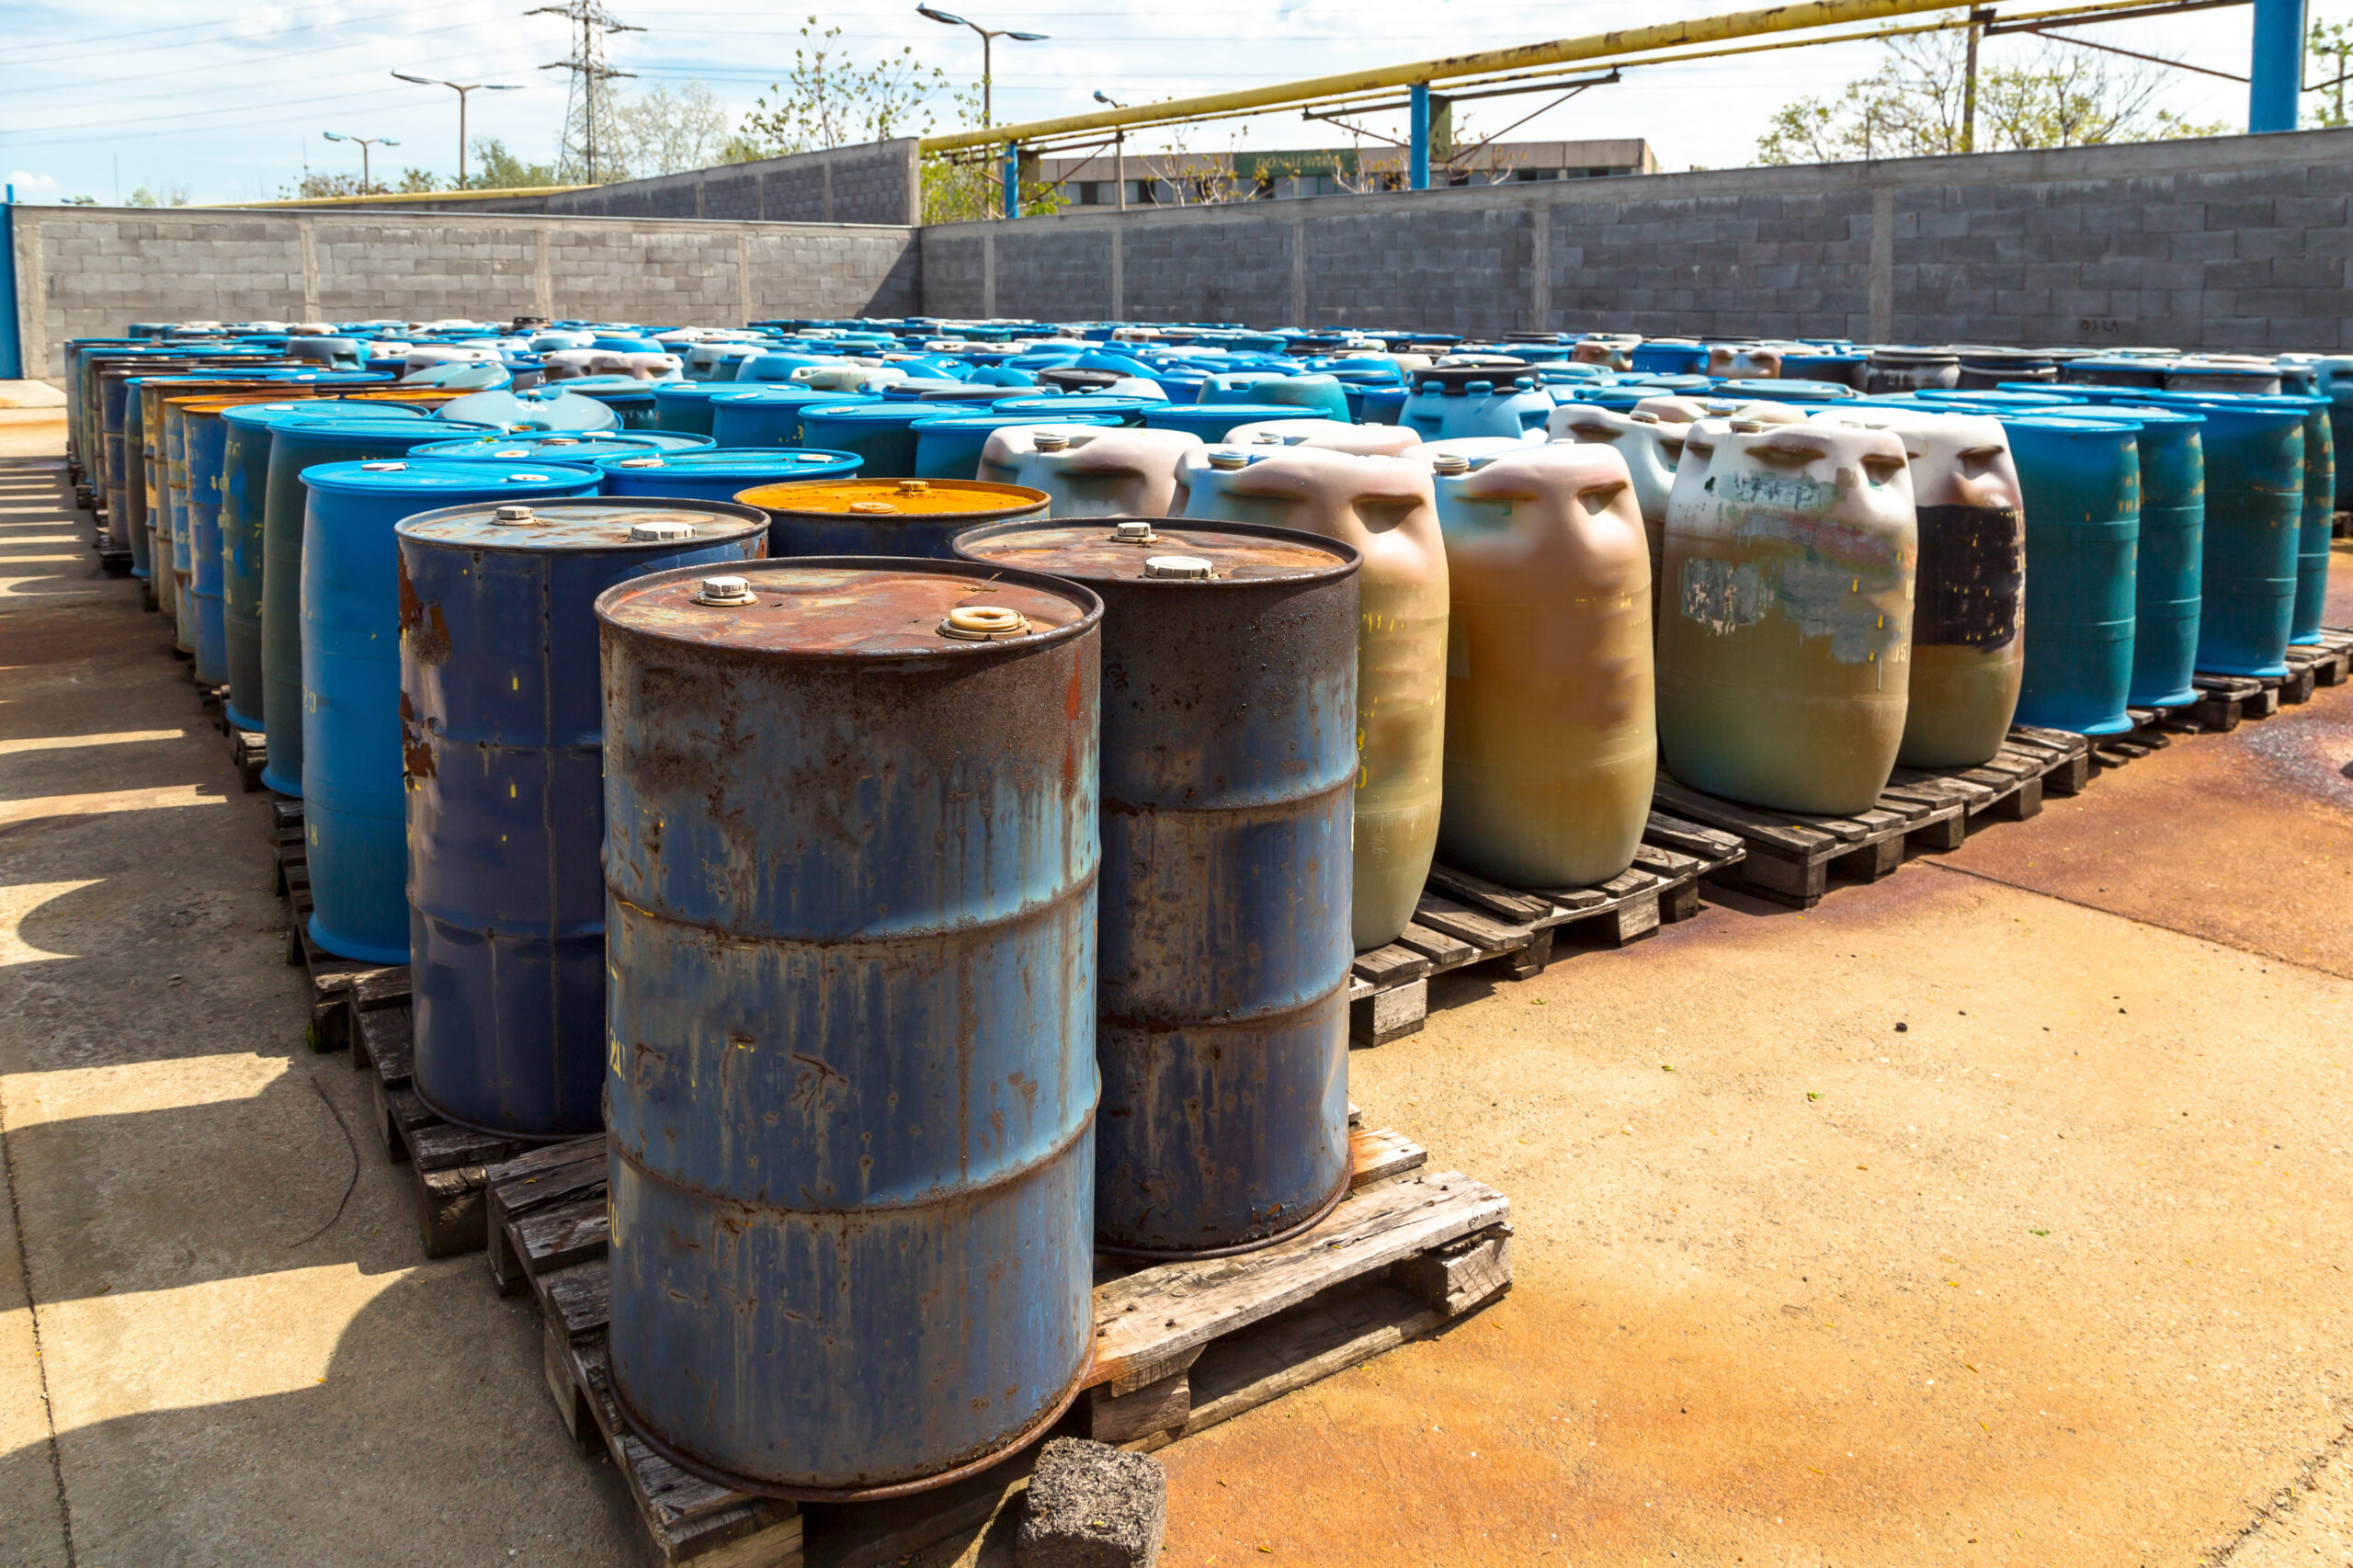 A group of dented, rusty barrels holding hazardous waste lined up on wooden pallets. 